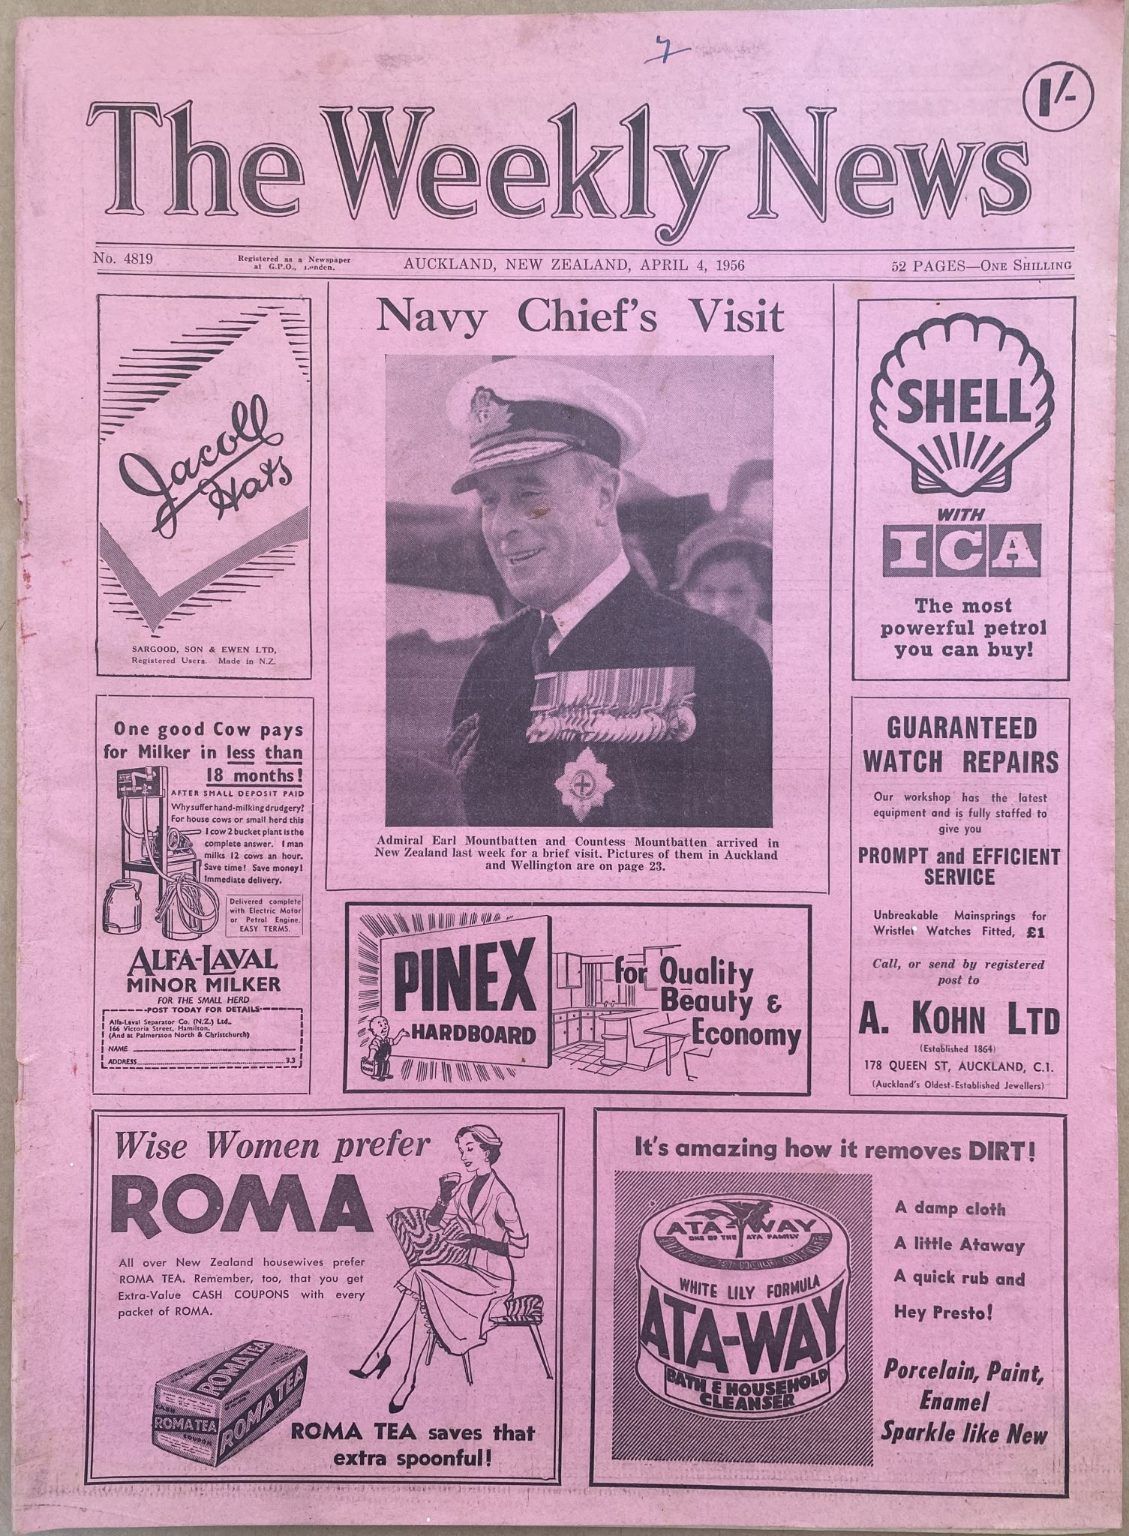 OLD NEWSPAPER: The Weekly News - No. 4819, 4 April 1956